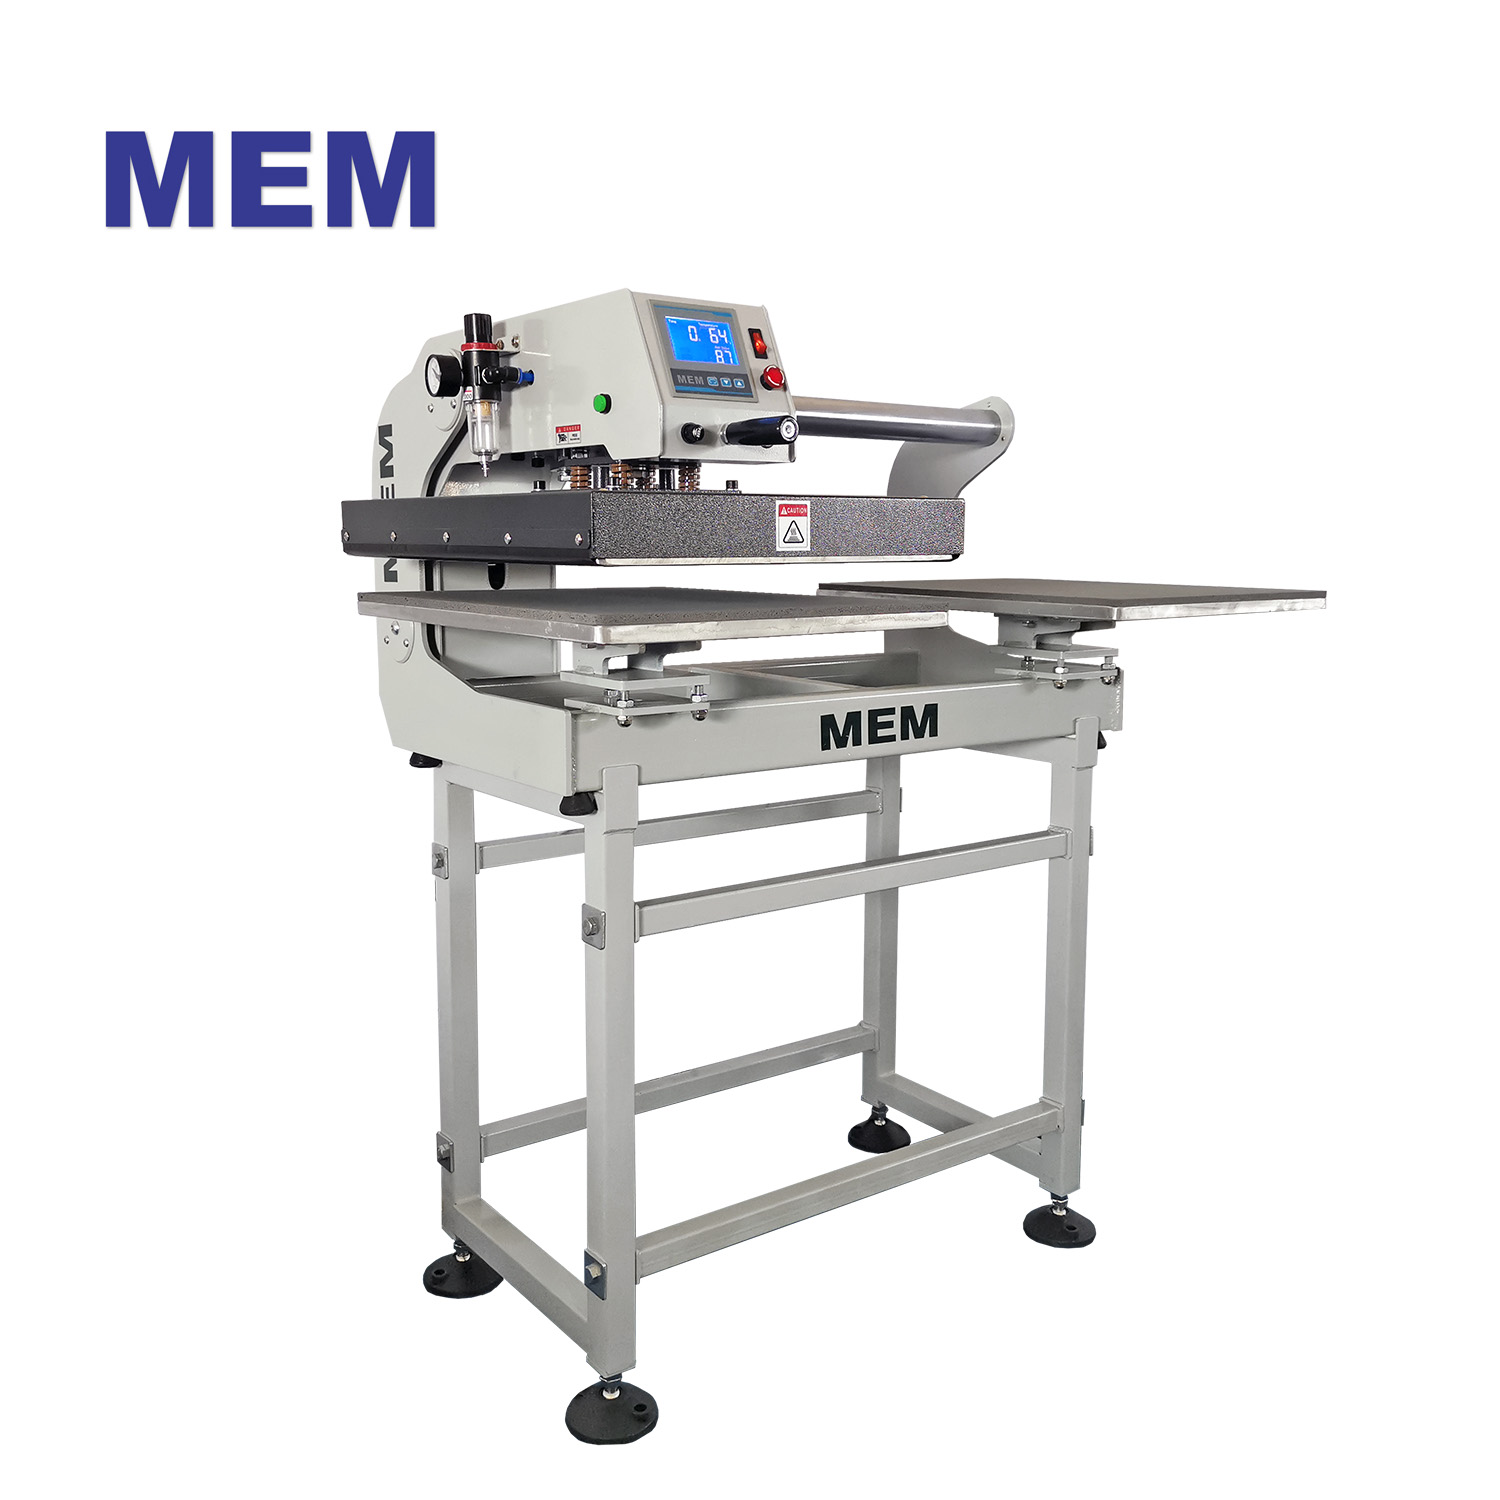 MEM 16" x 20" Semi-Automatic Pneumatic Double Station Heat Press with Laser Positioning System